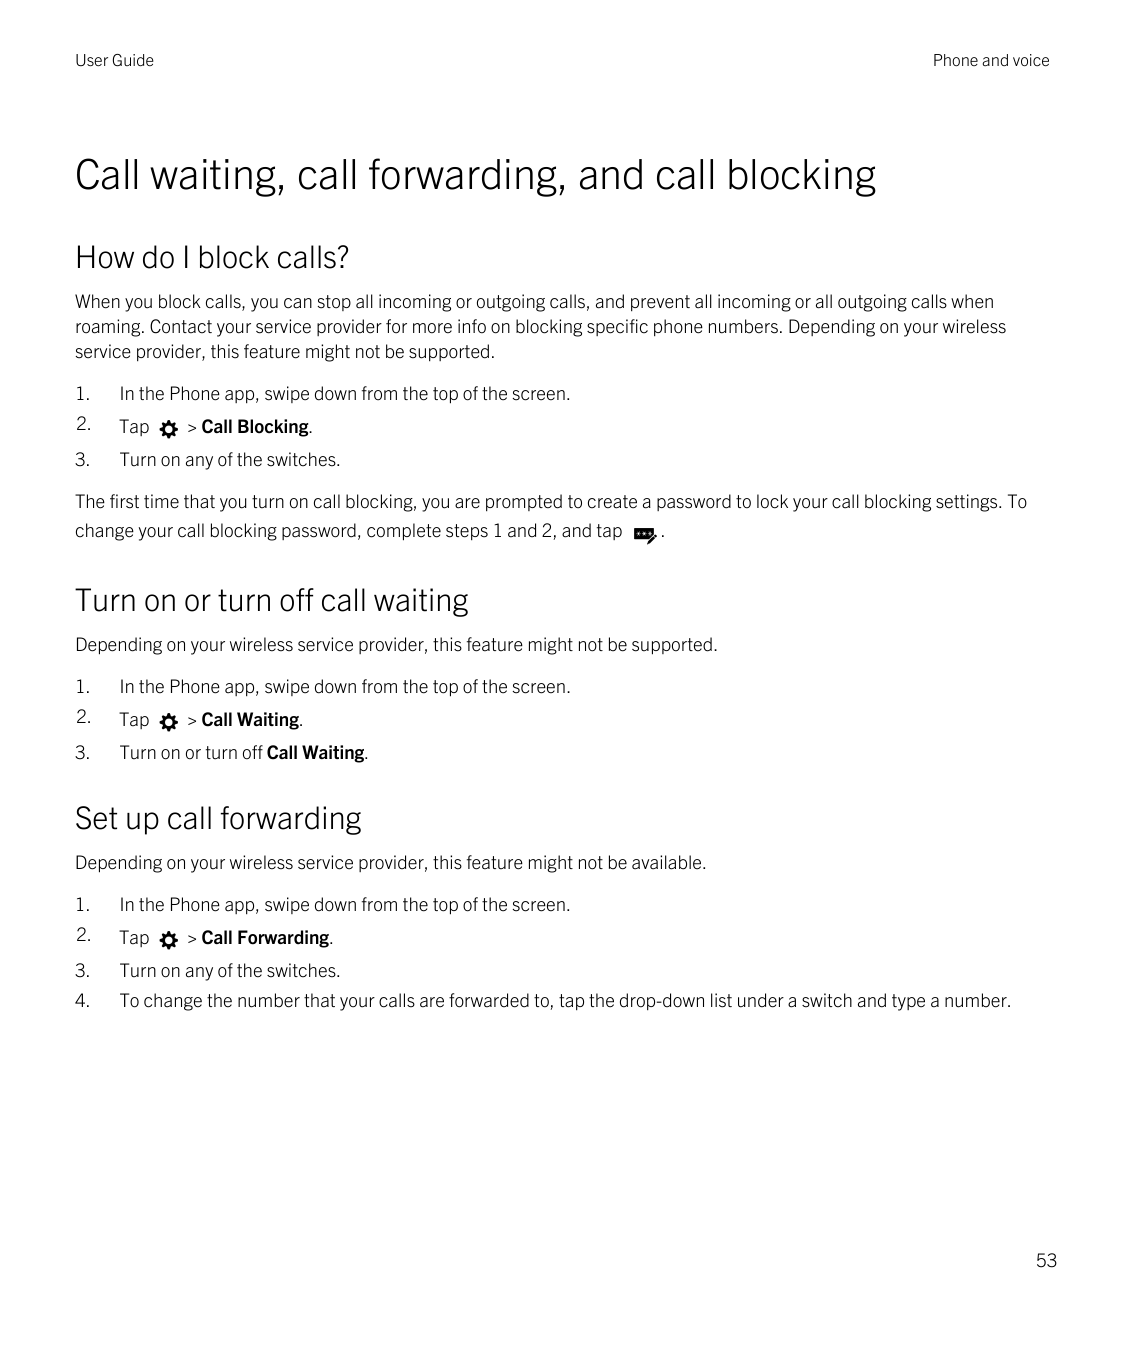 User GuidePhone and voiceCall waiting, call forwarding, and call blockingHow do I block calls?When you block calls, you can stop